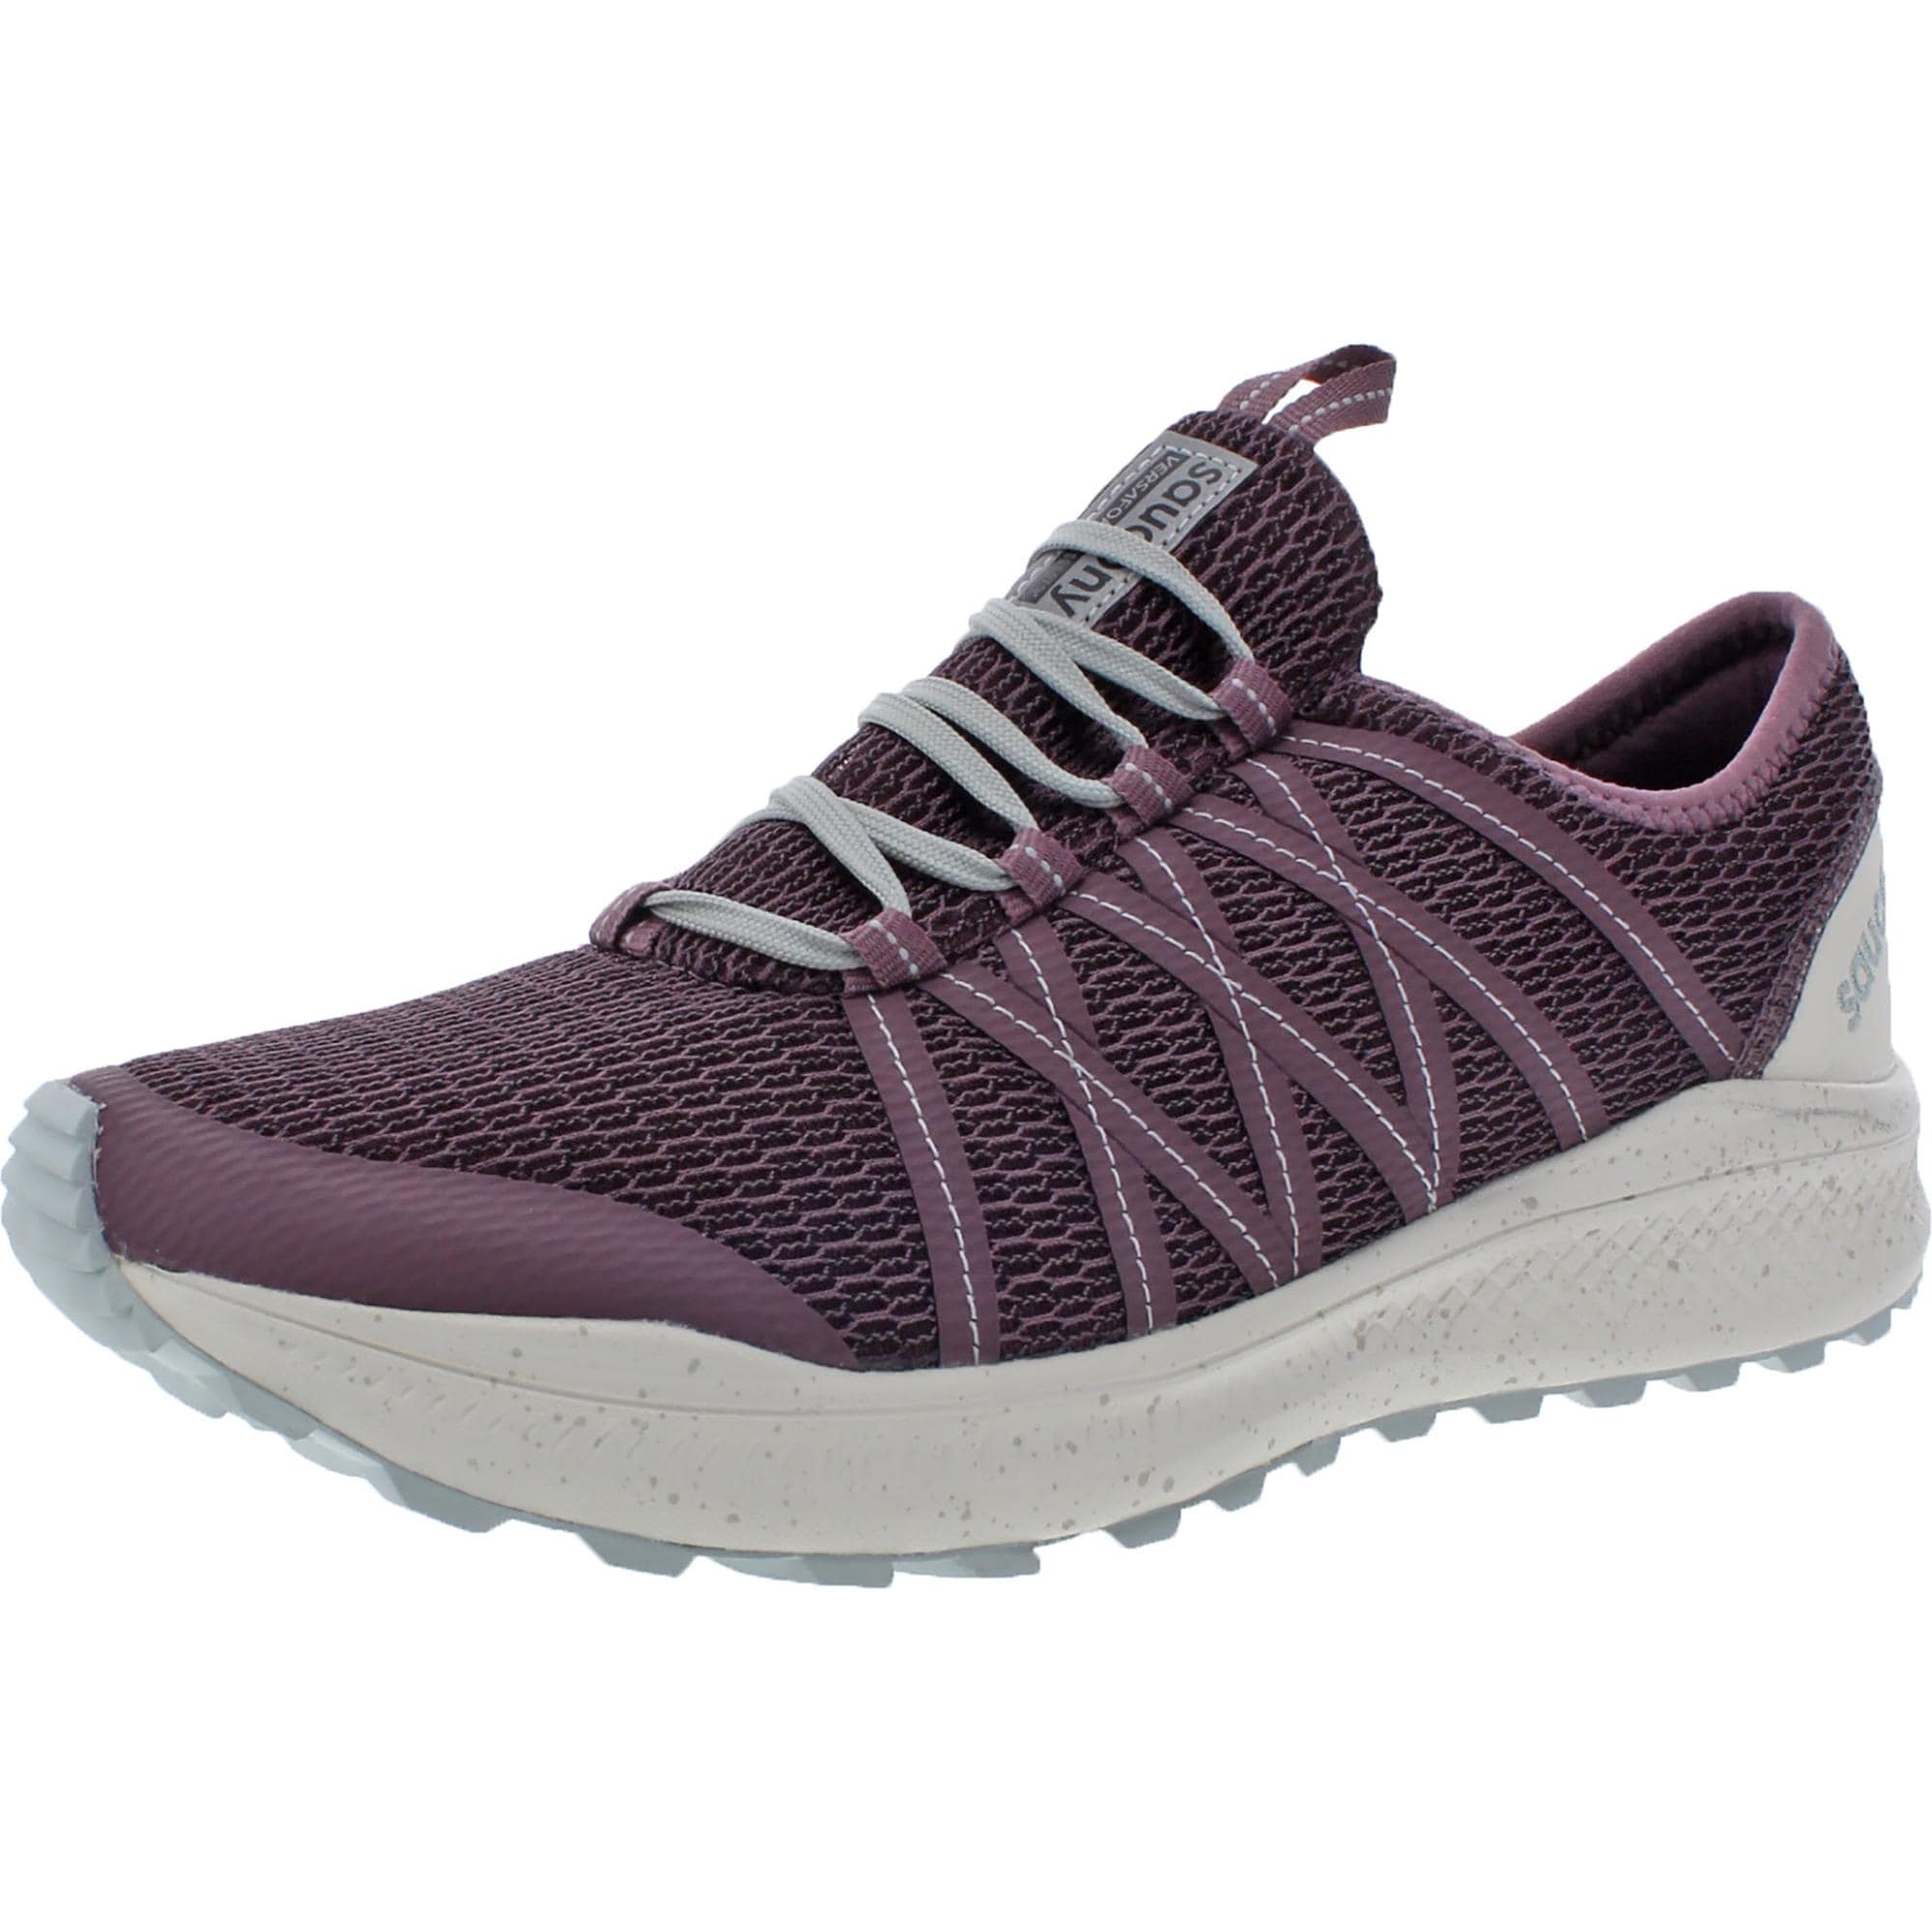 saucony narrow womens running shoes